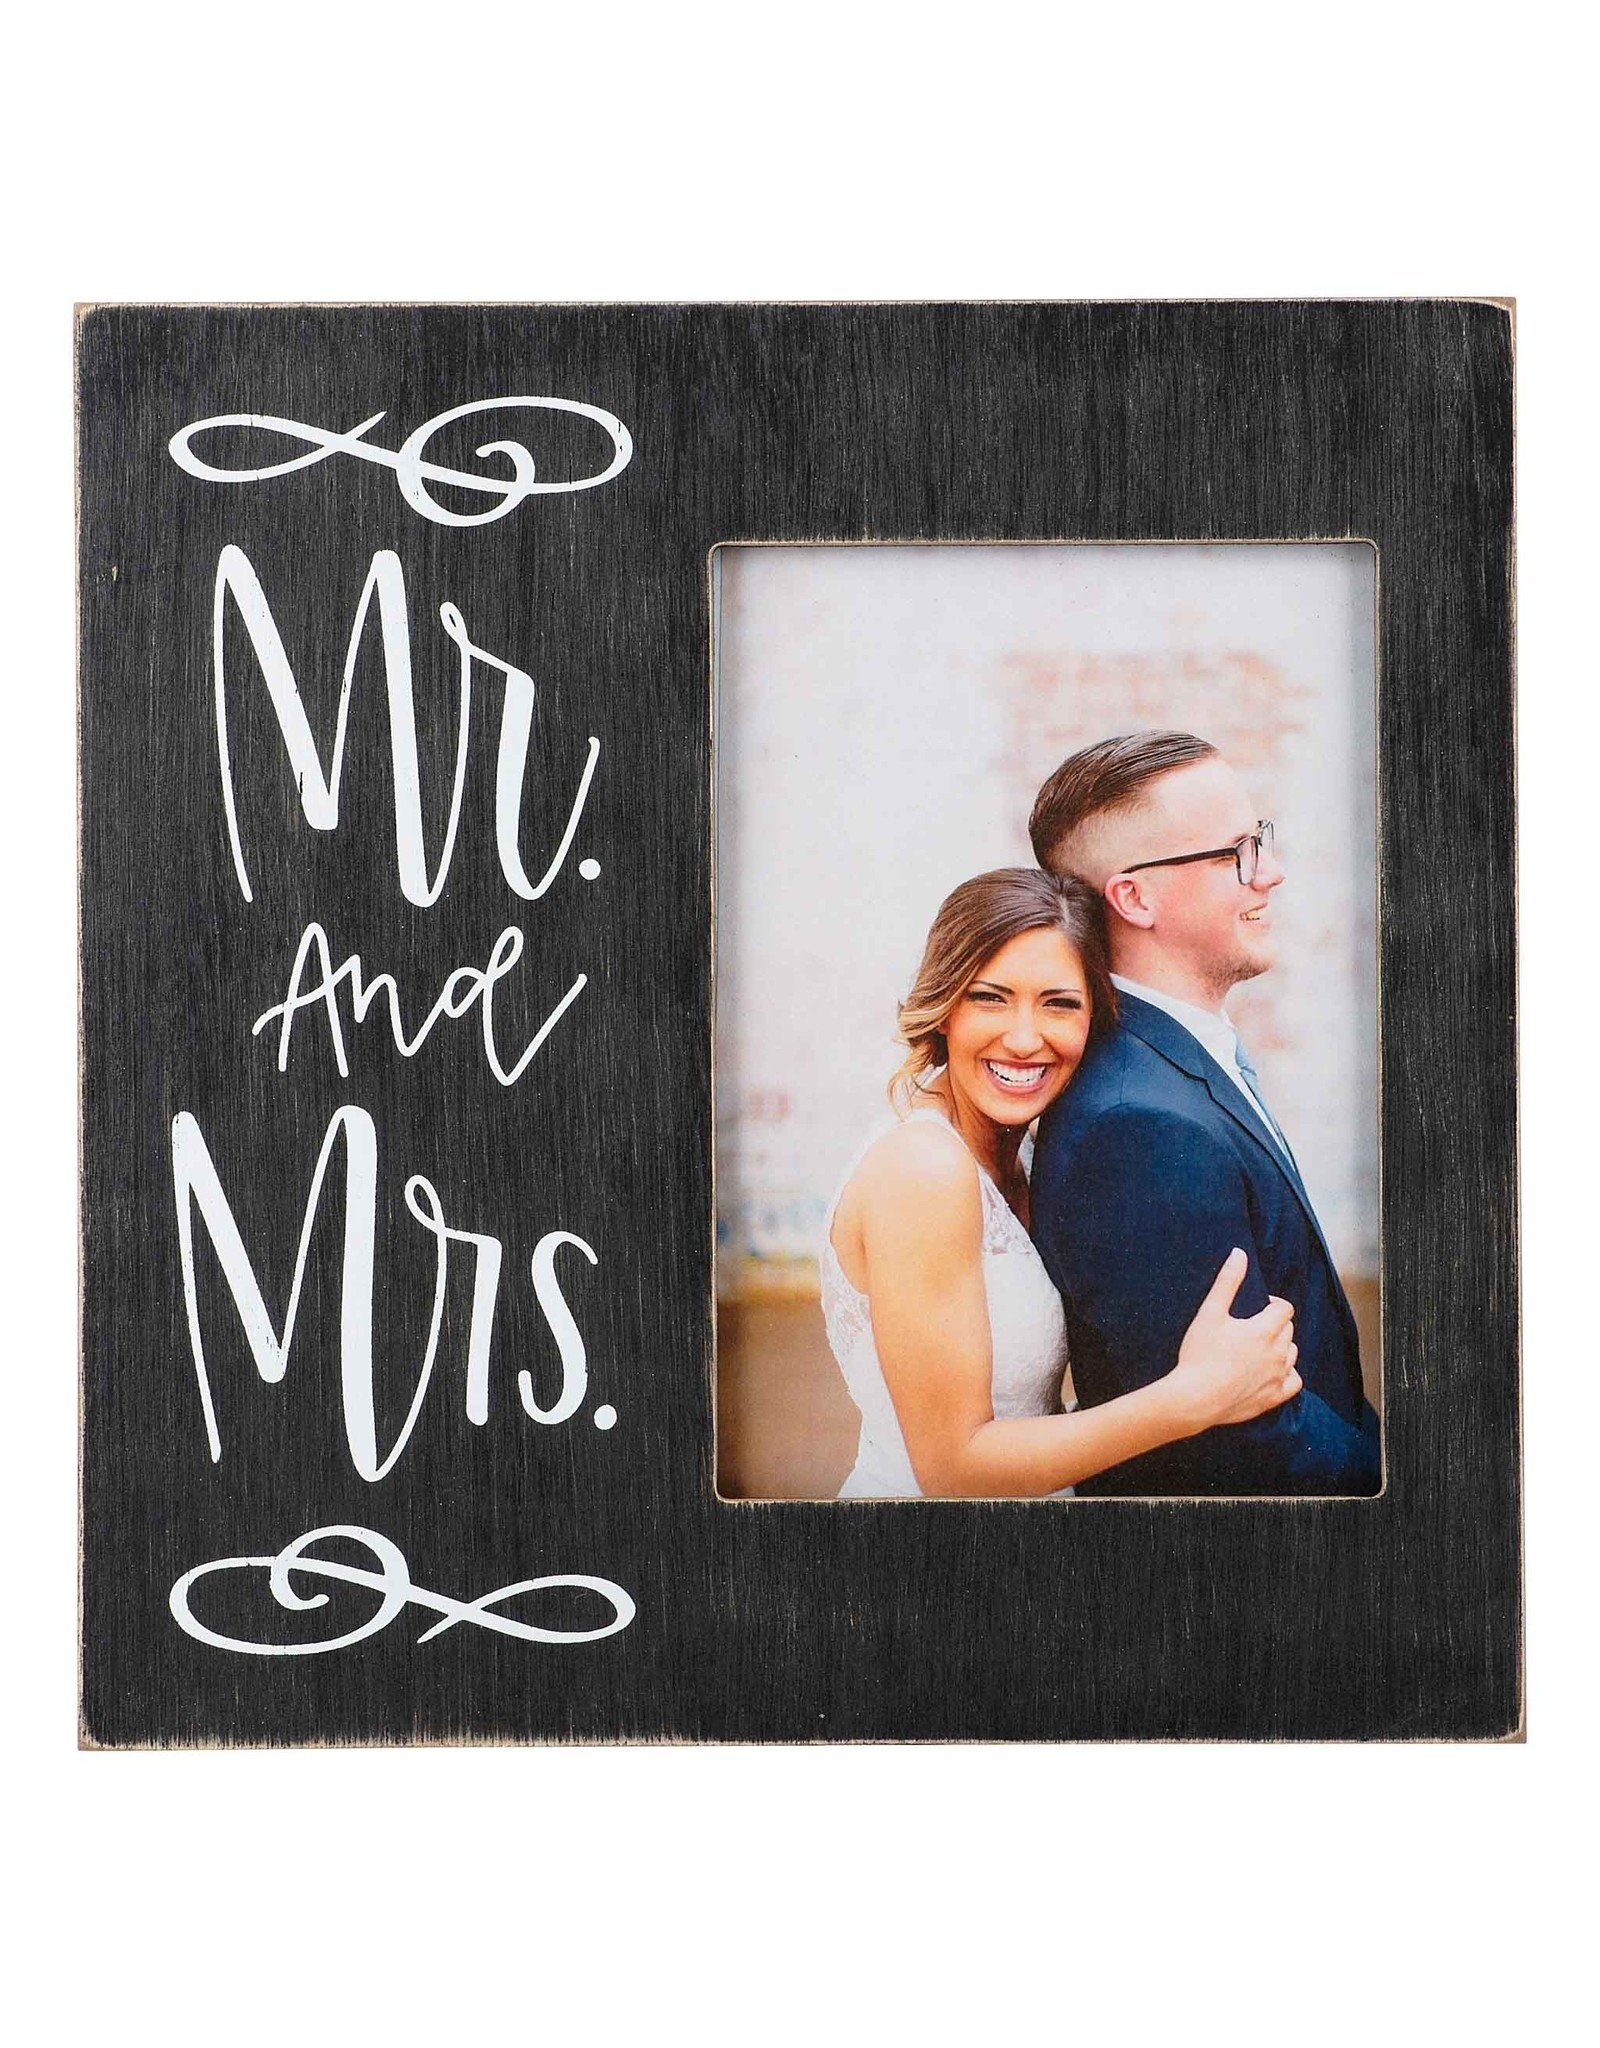 Mr. and Mrs. Frame - Miche Designs and Gifts